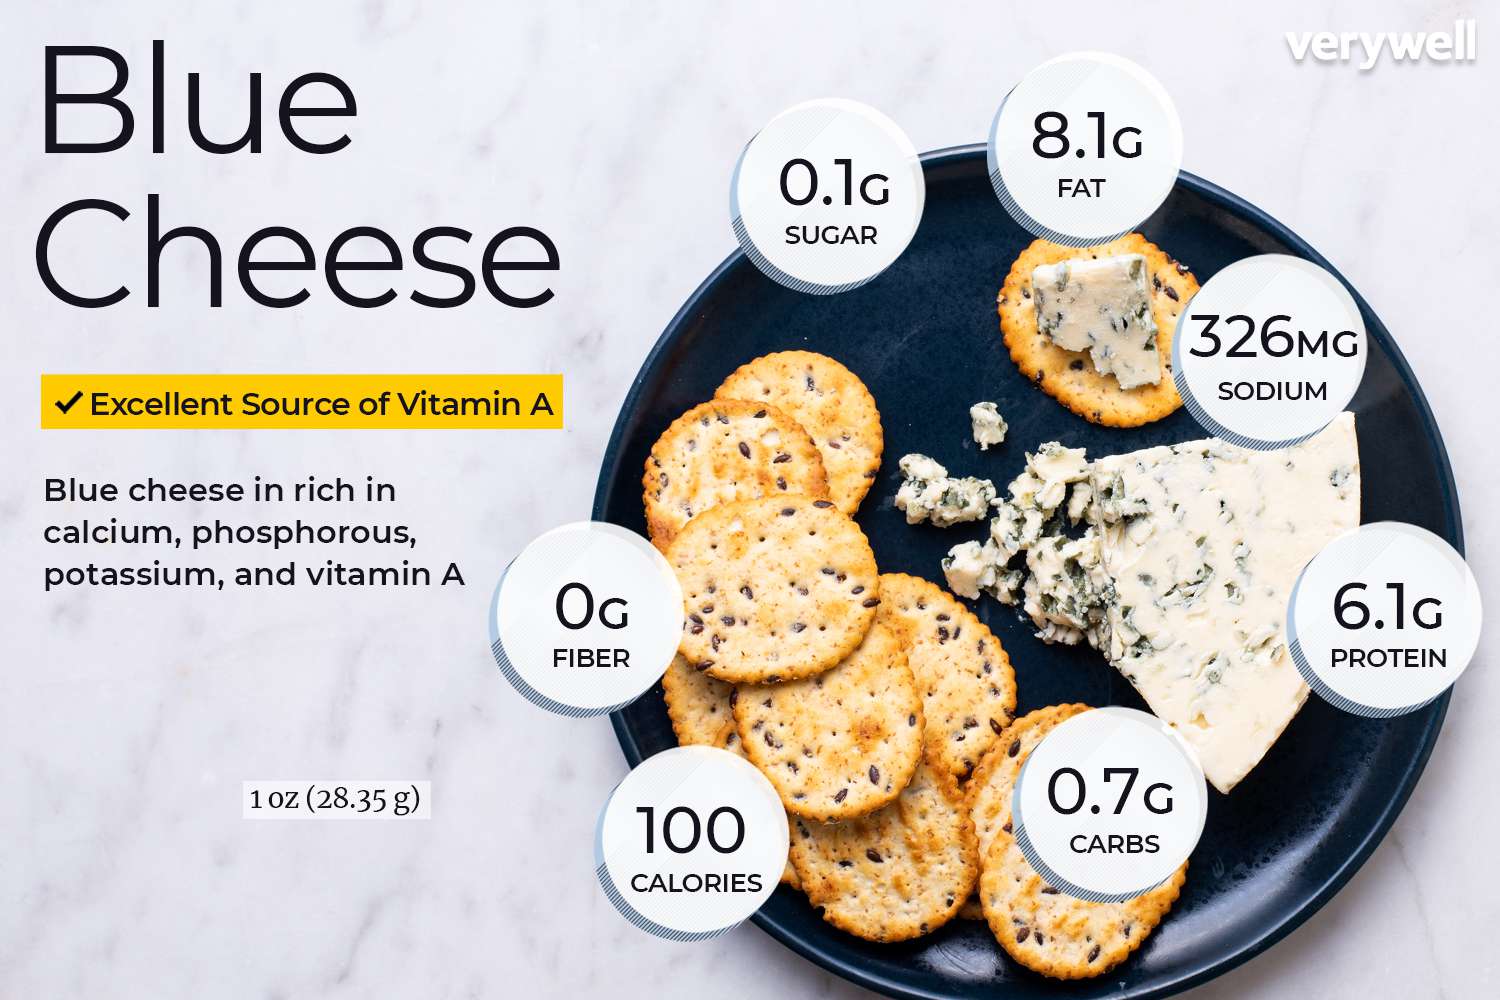 Blue cheese nutrition facts